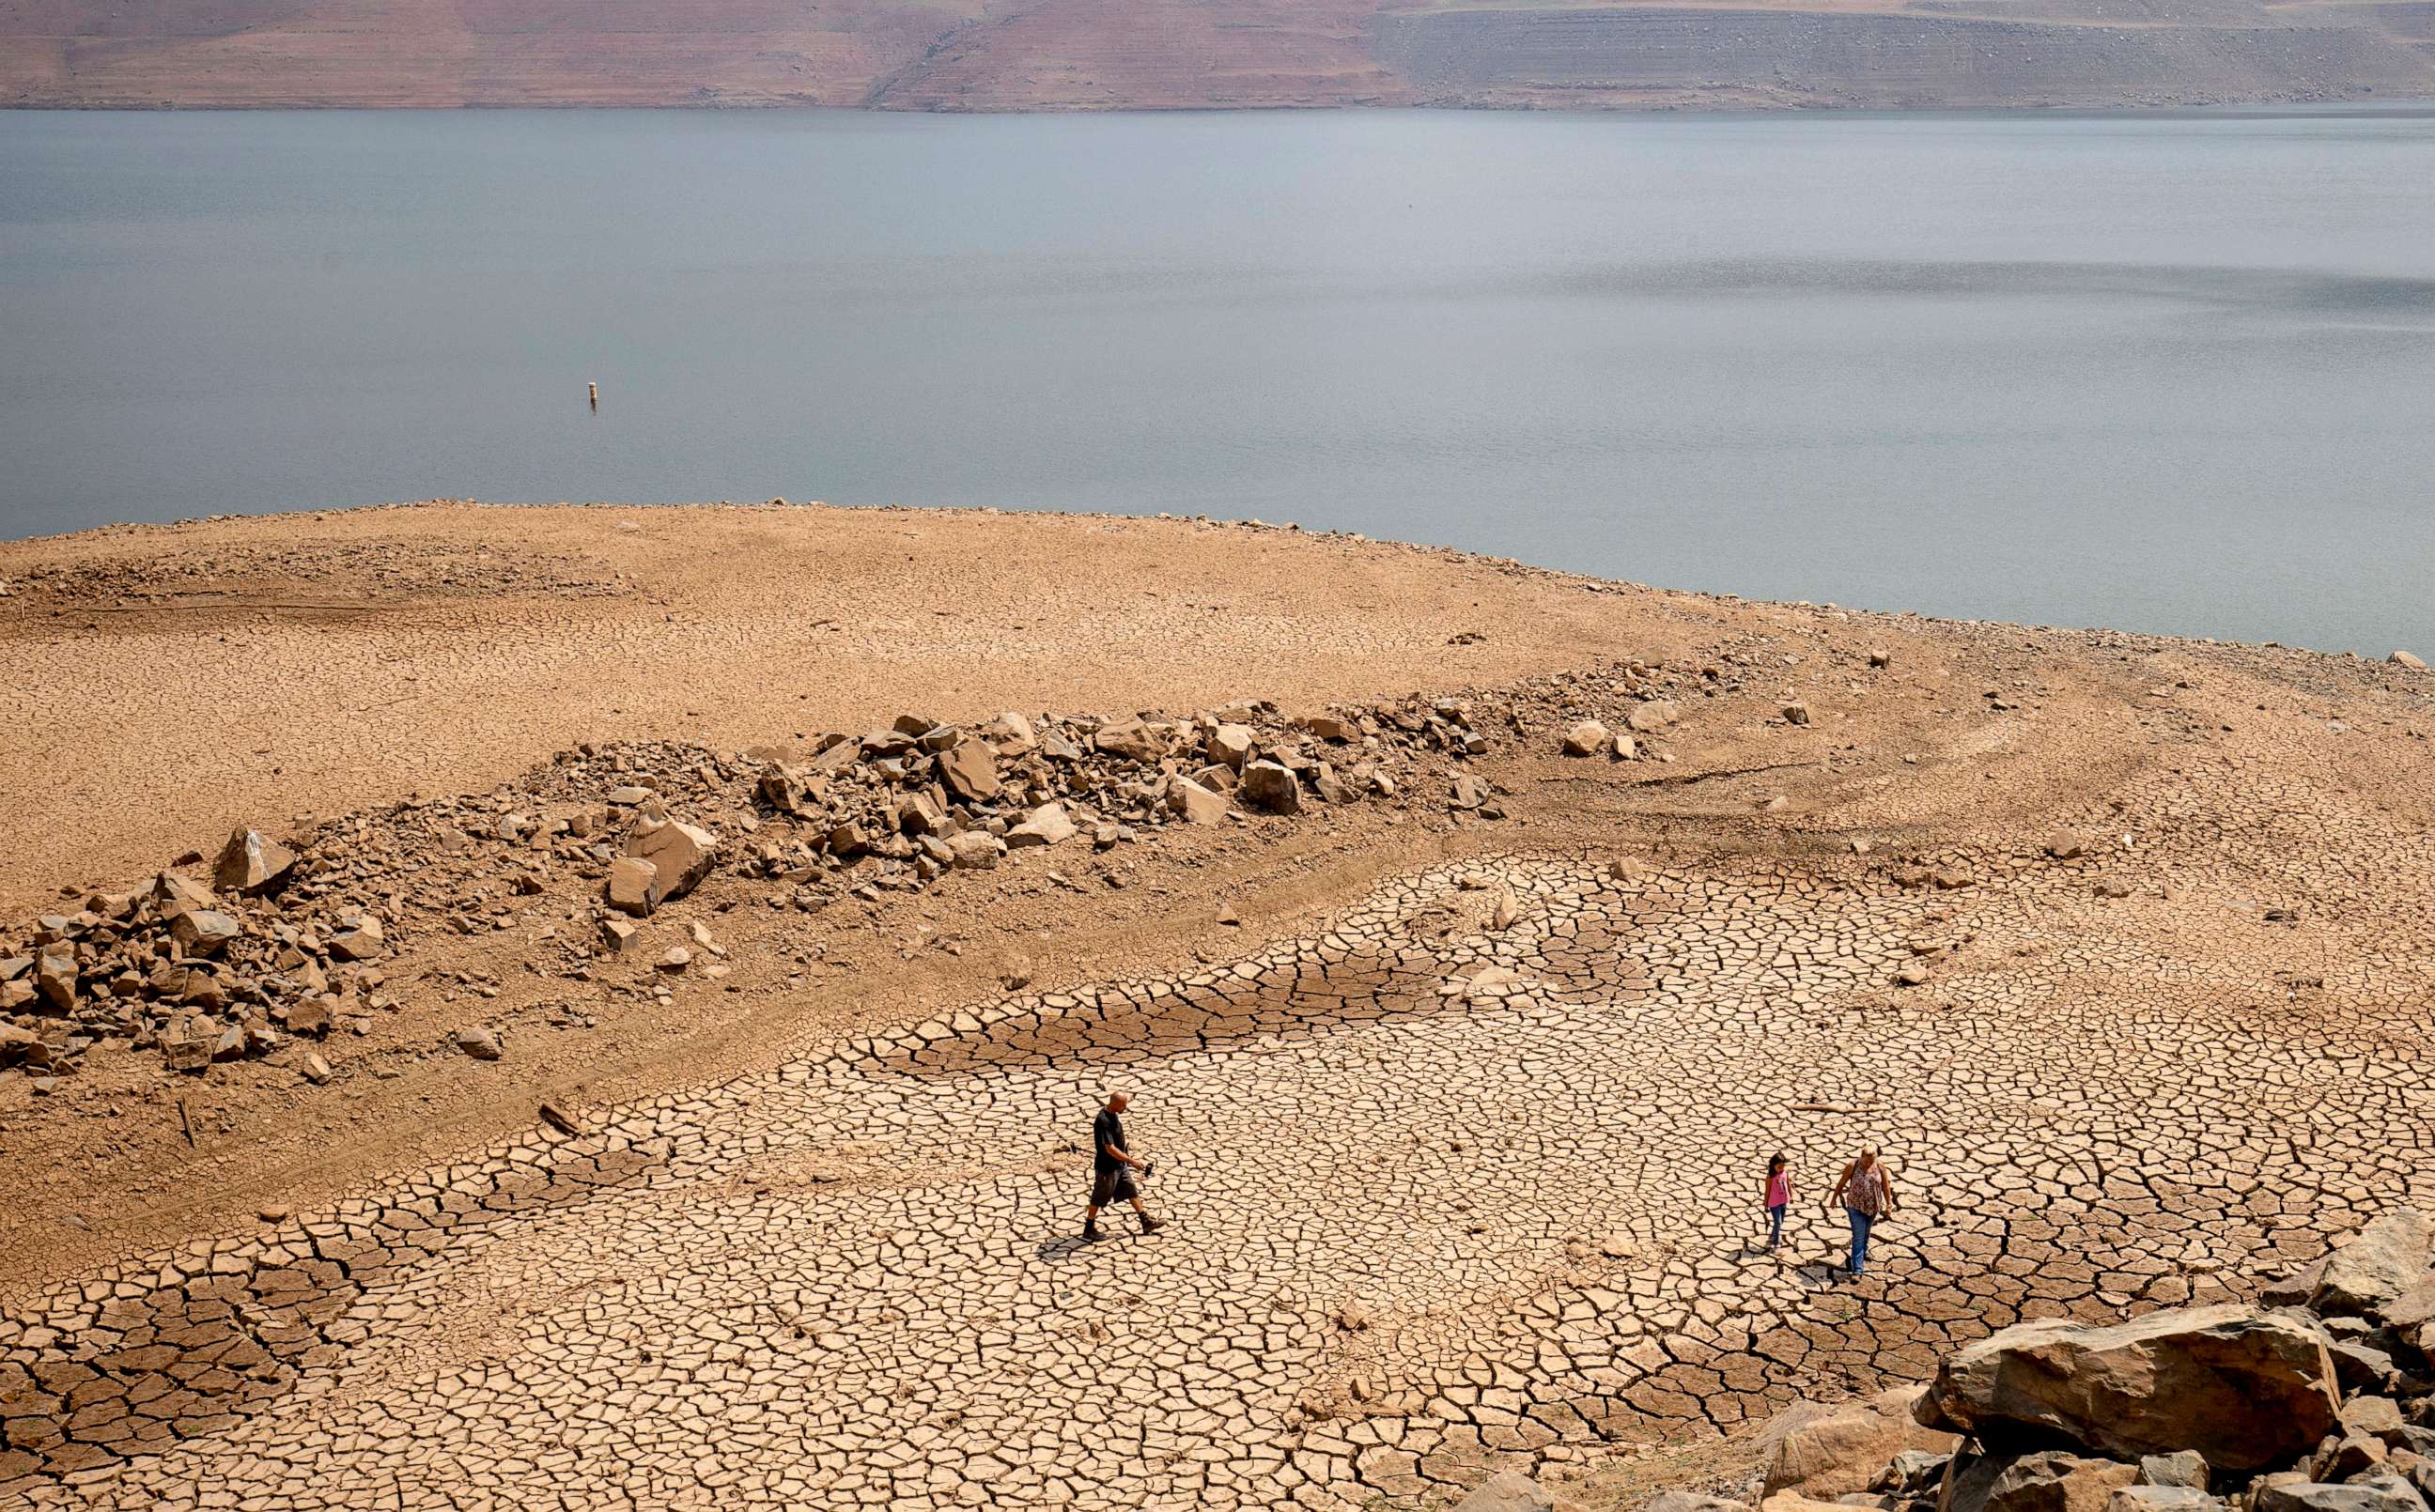 PHOTO: A family walks over cracked mud near Lake Oroville's shore as water levels remain low due to continuing drought conditions, Aug. 22, 2021, in Oroville, Calif.